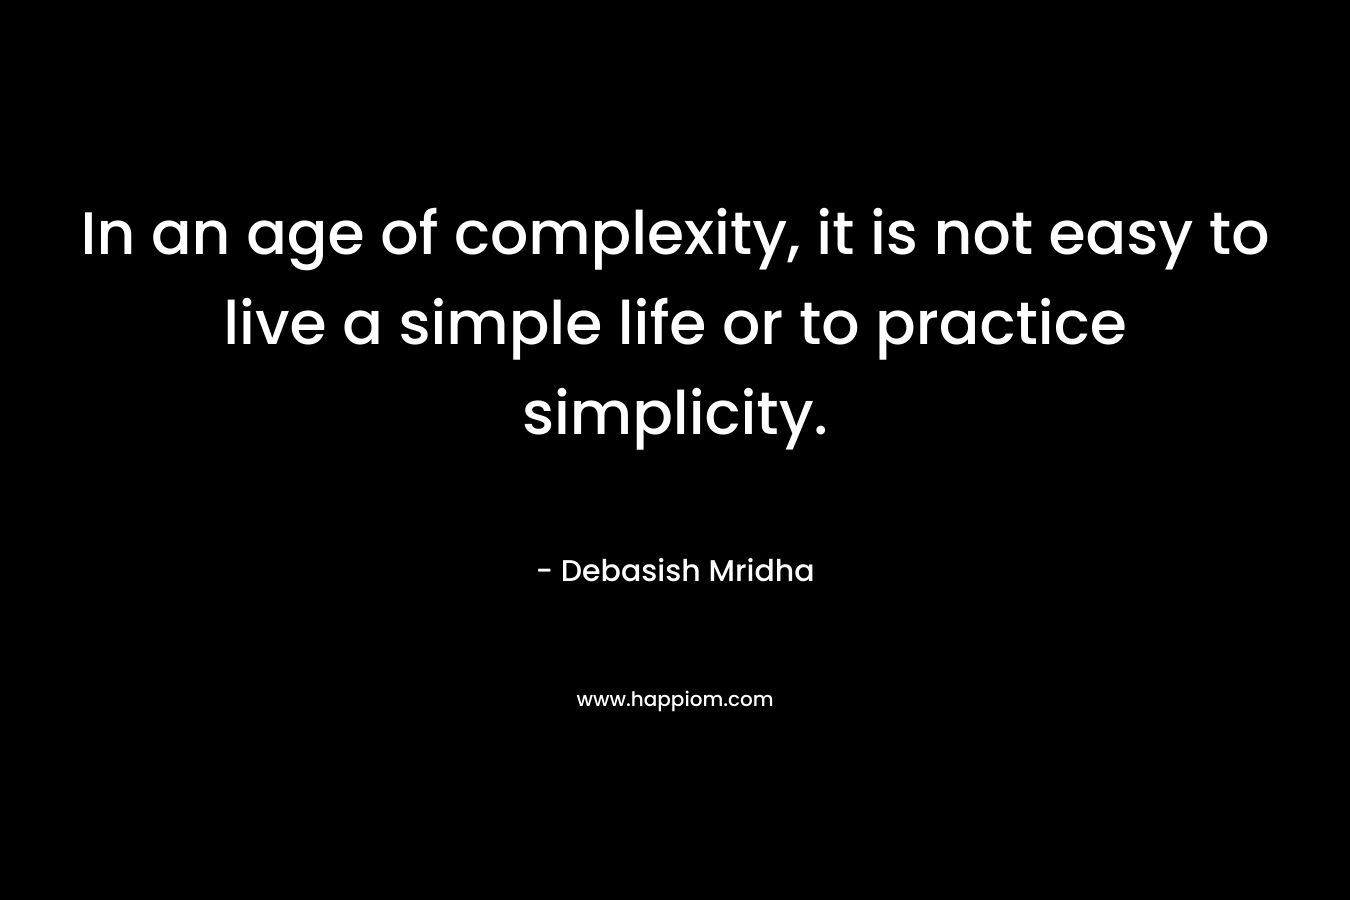 In an age of complexity, it is not easy to live a simple life or to practice simplicity. – Debasish Mridha